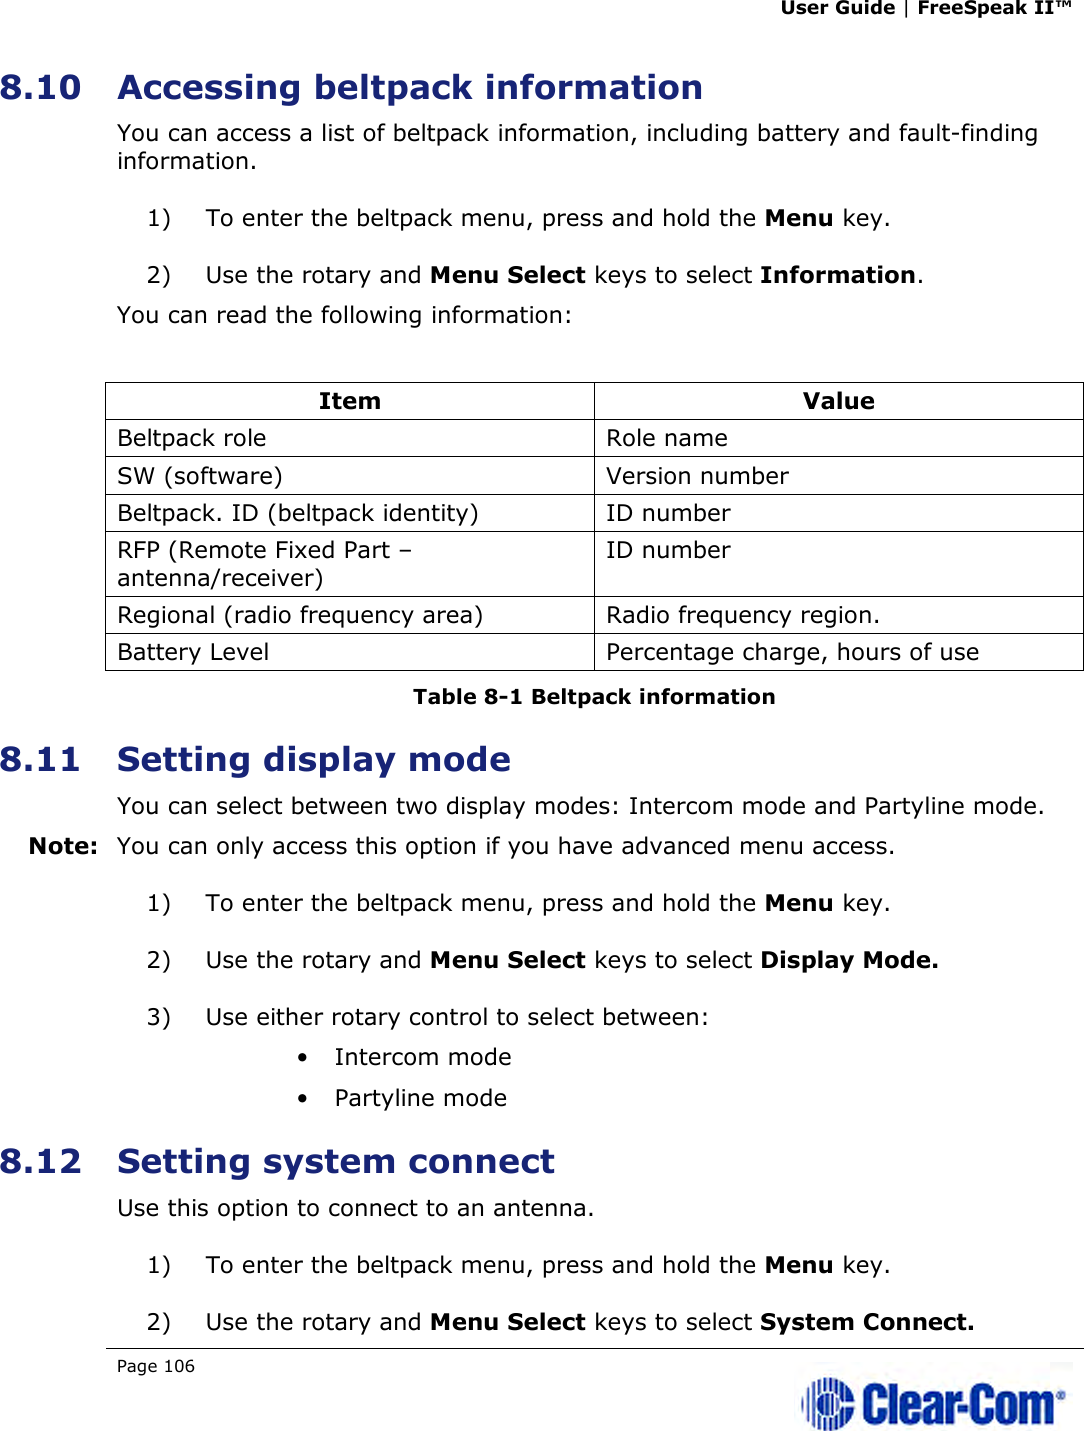 User Guide | FreeSpeak II™  Page 106   8.10 Accessing beltpack information You can access a list of beltpack information, including battery and fault-finding information. 1) To enter the beltpack menu, press and hold the Menu key. 2) Use the rotary and Menu Select keys to select Information. You can read the following information:  Item  Value Beltpack role  Role name SW (software)  Version number Beltpack. ID (beltpack identity)  ID number RFP (Remote Fixed Part – antenna/receiver) ID number Regional (radio frequency area)  Radio frequency region. Battery Level  Percentage charge, hours of use Table 8-1 Beltpack information 8.11 Setting display mode You can select between two display modes: Intercom mode and Partyline mode. Note: You can only access this option if you have advanced menu access. 1) To enter the beltpack menu, press and hold the Menu key. 2) Use the rotary and Menu Select keys to select Display Mode.  3) Use either rotary control to select between: • Intercom mode • Partyline mode 8.12 Setting system connect Use this option to connect to an antenna. 1) To enter the beltpack menu, press and hold the Menu key. 2) Use the rotary and Menu Select keys to select System Connect. 